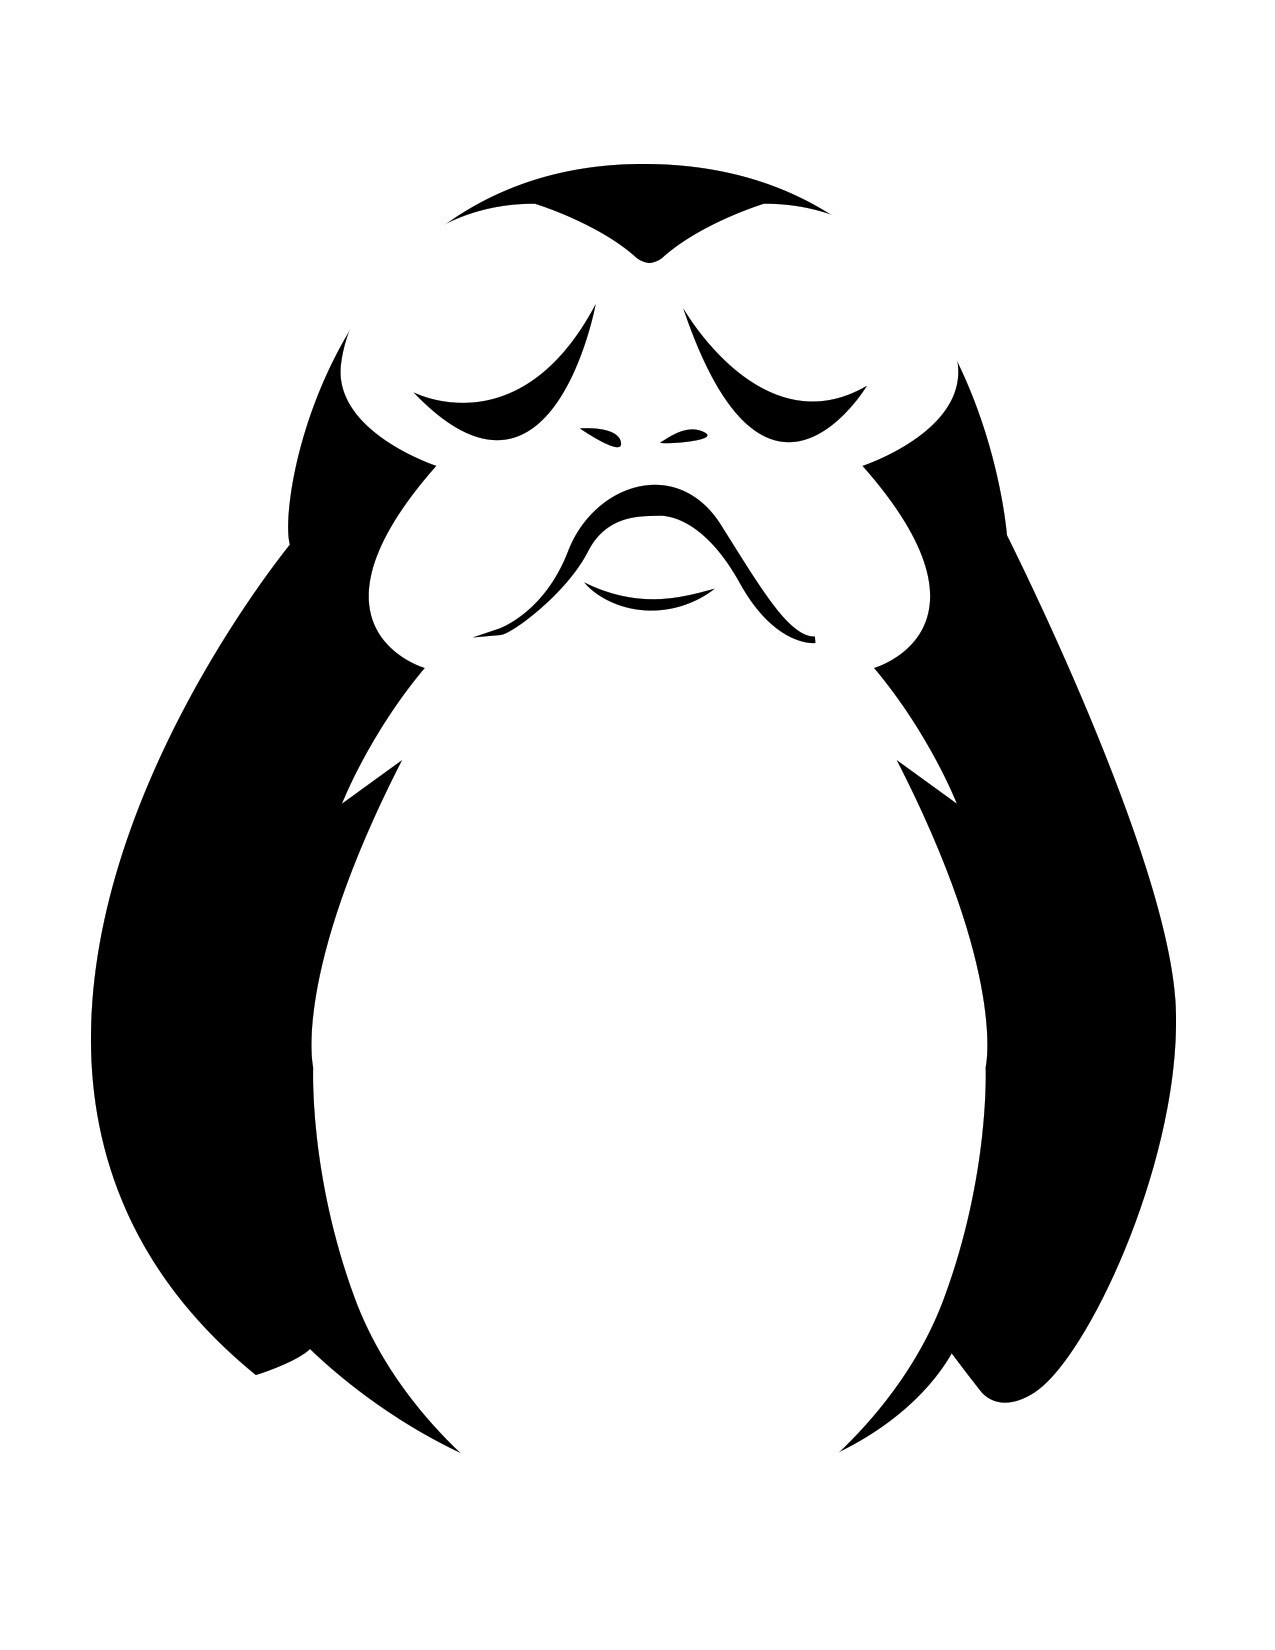 A sleepy porg with its eyes closed, depicted in a minimalist black-and-white graphic style.